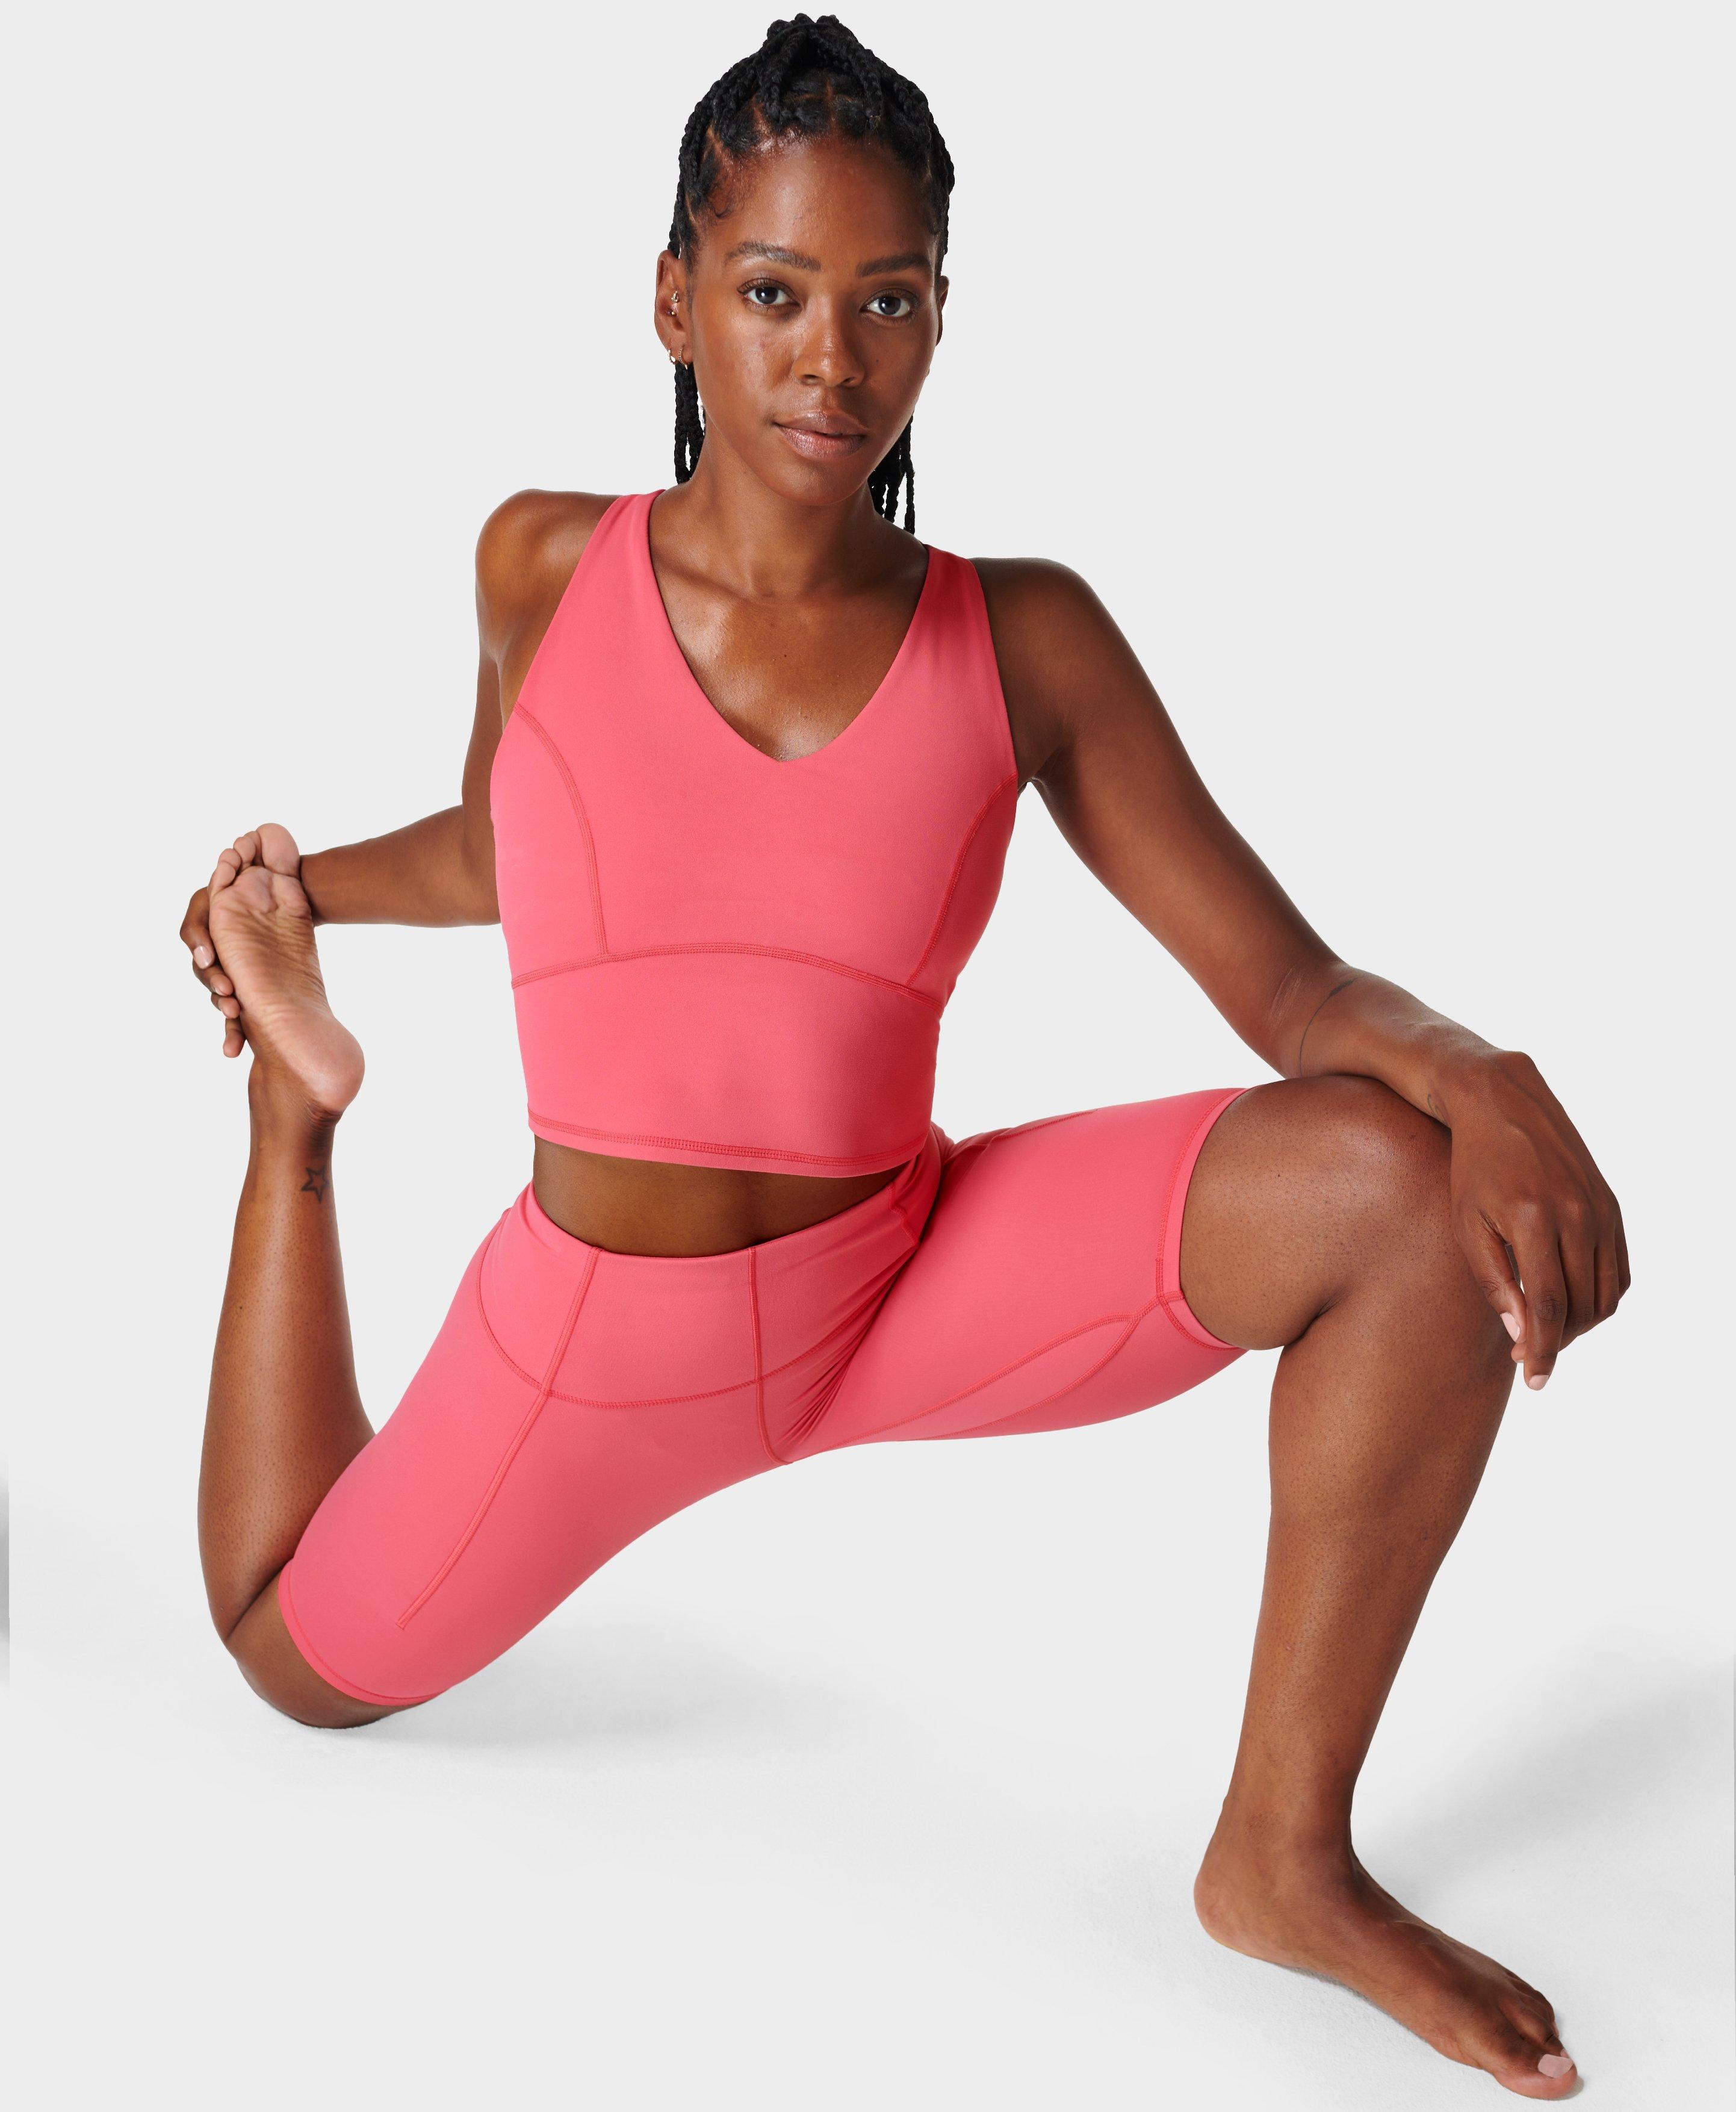 Sweaty Betty Super Soft High Neck Workout Tank Top, Bloom Pink at